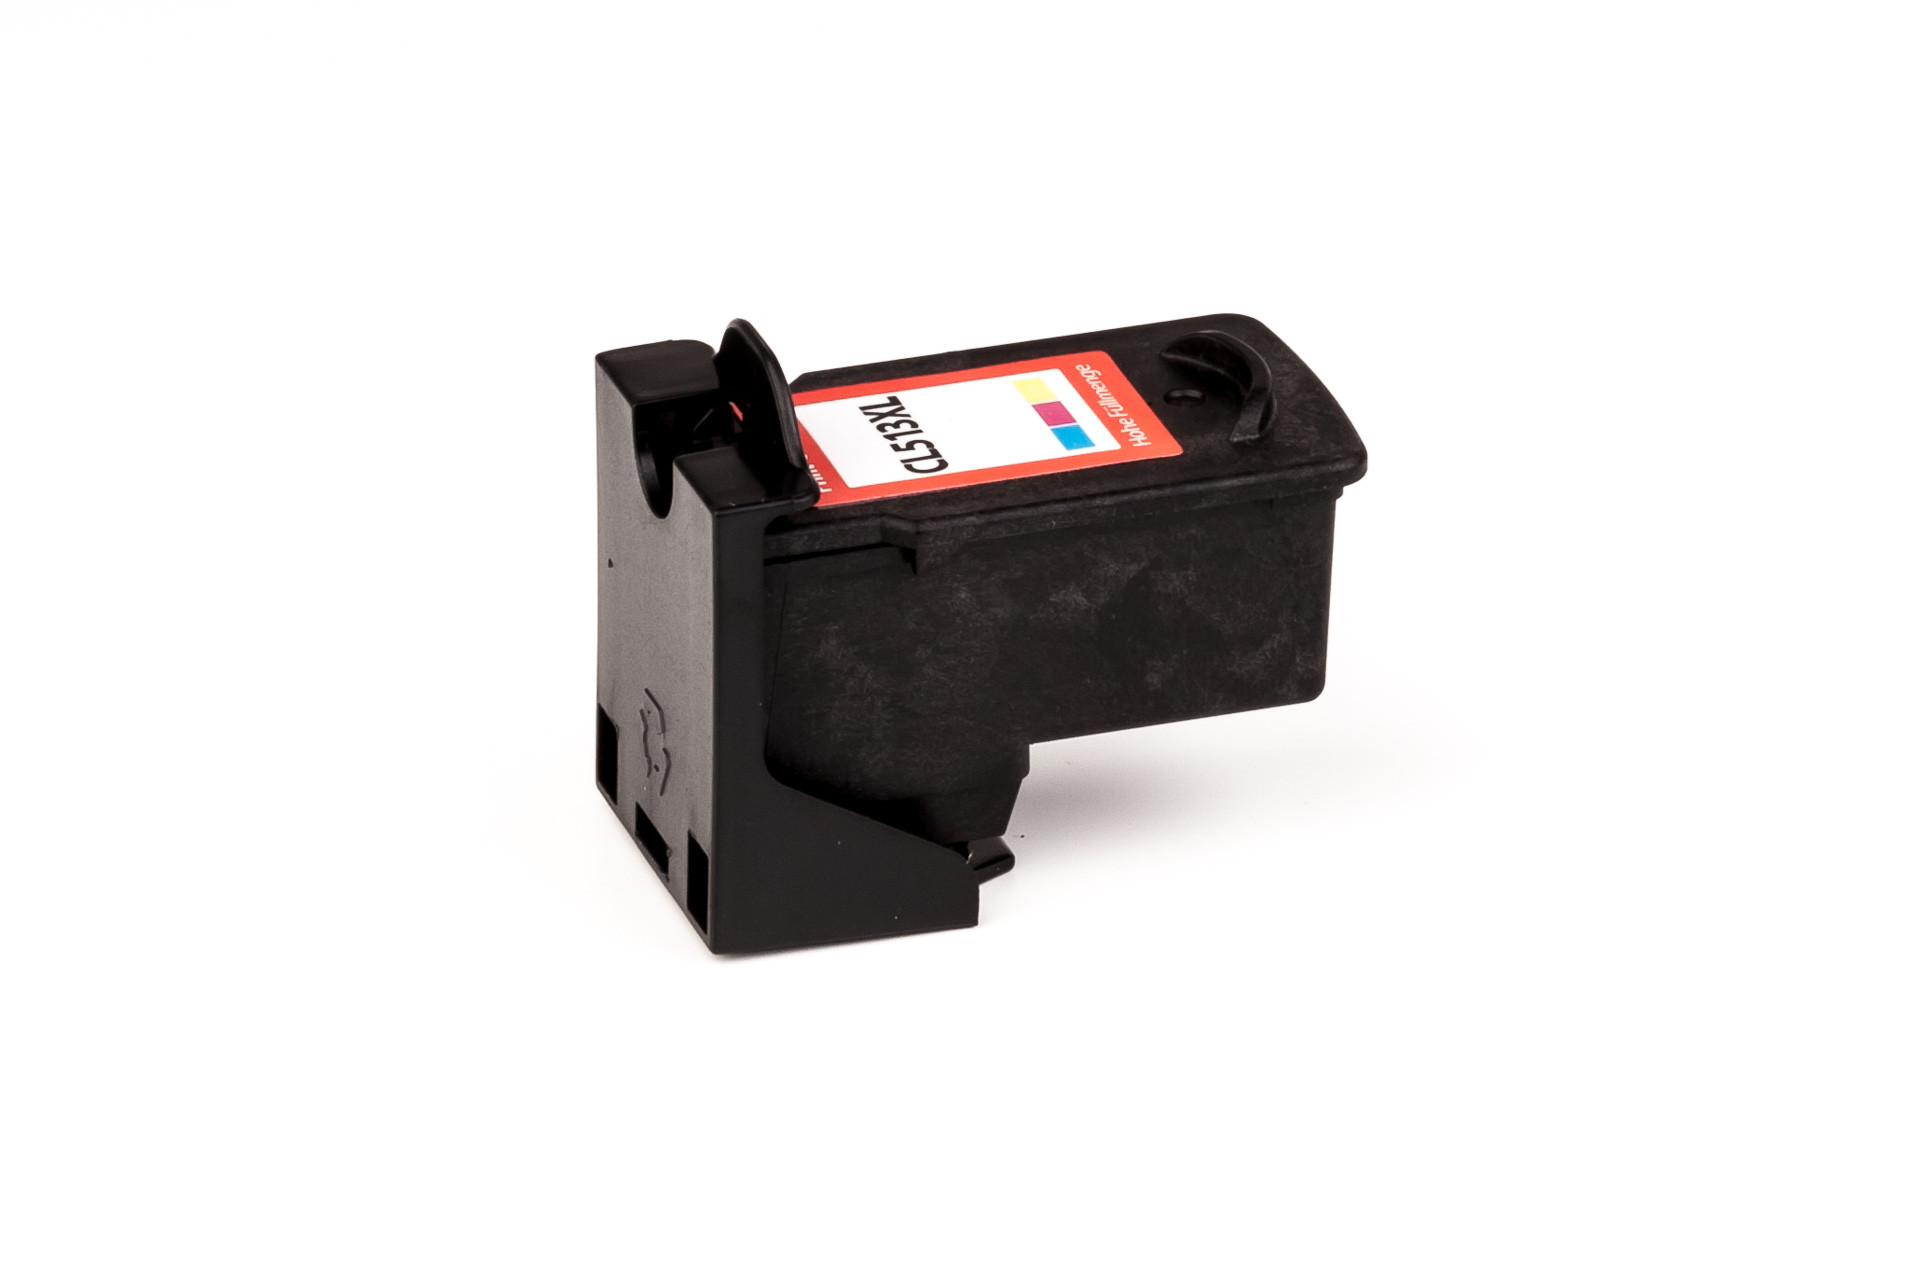 Ink cartridge (alternative) compatible with Canon 2971B001/2971 B 001 - CL513/CL-513 - Pixma IP 2700 tri